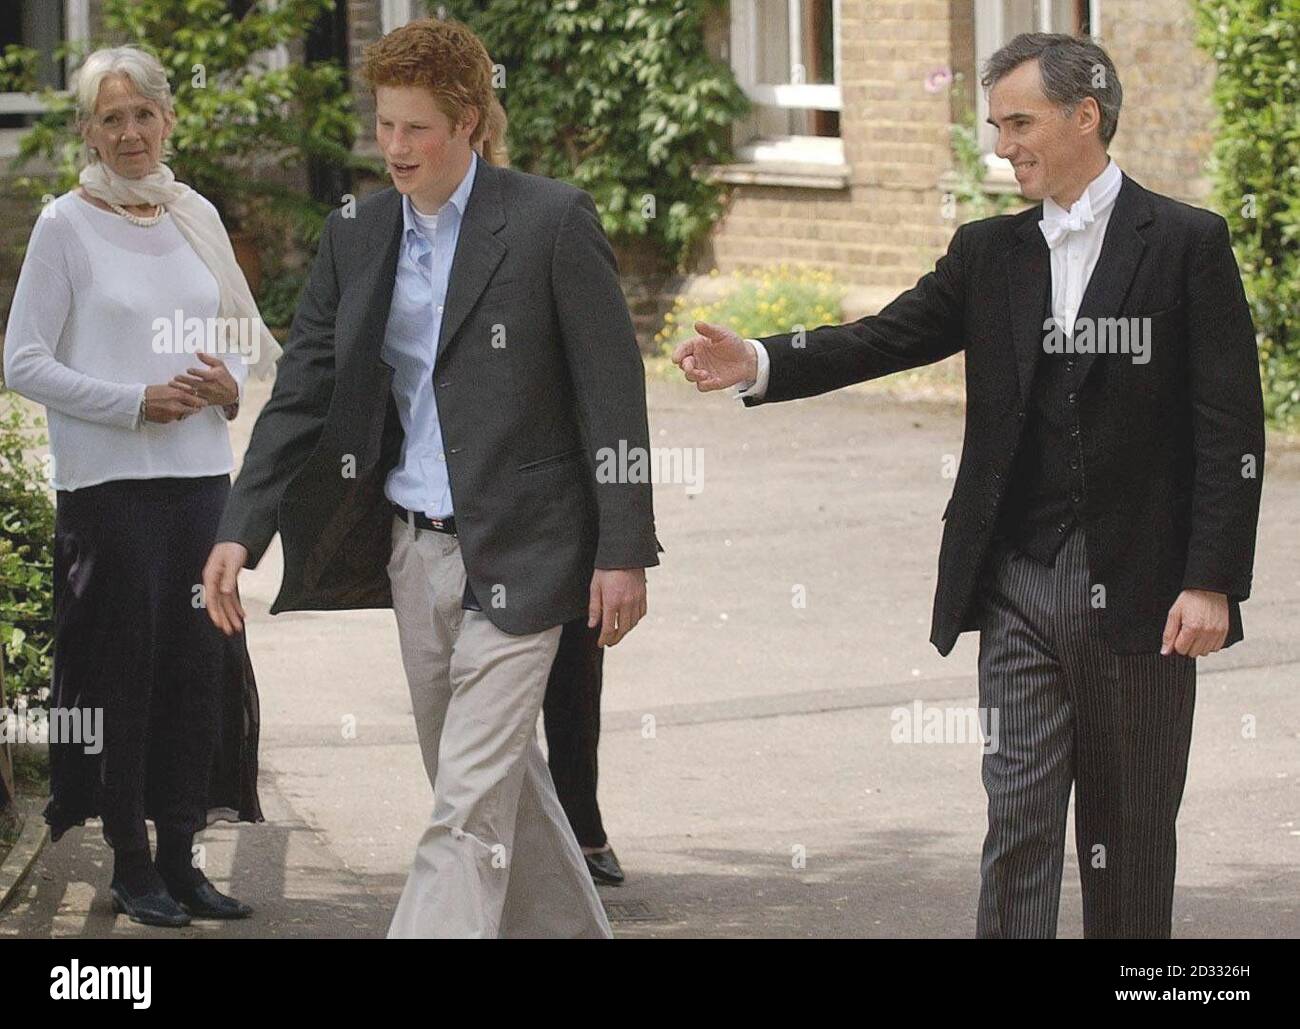 Prince Harry, the younger son of the Prince of Wales, says his farewells to his House Master Andrew Gailey as he leaves Eton College on his last day at the top public school where he has been a pupil for five years. * Like his older brother William, Harry has spent his Eton schooldays boarding at Manor House, on the site of the lodgings of probably the most famous Old Etonian of them all, victor of Waterloo, the Duke of Wellington. It has been announced that Prince Harry is to apply for entry to the Royal Military Acdemy at Sandhurst. 14/06/03 : House Master Andrew Gailey saying farewell to Stock Photo